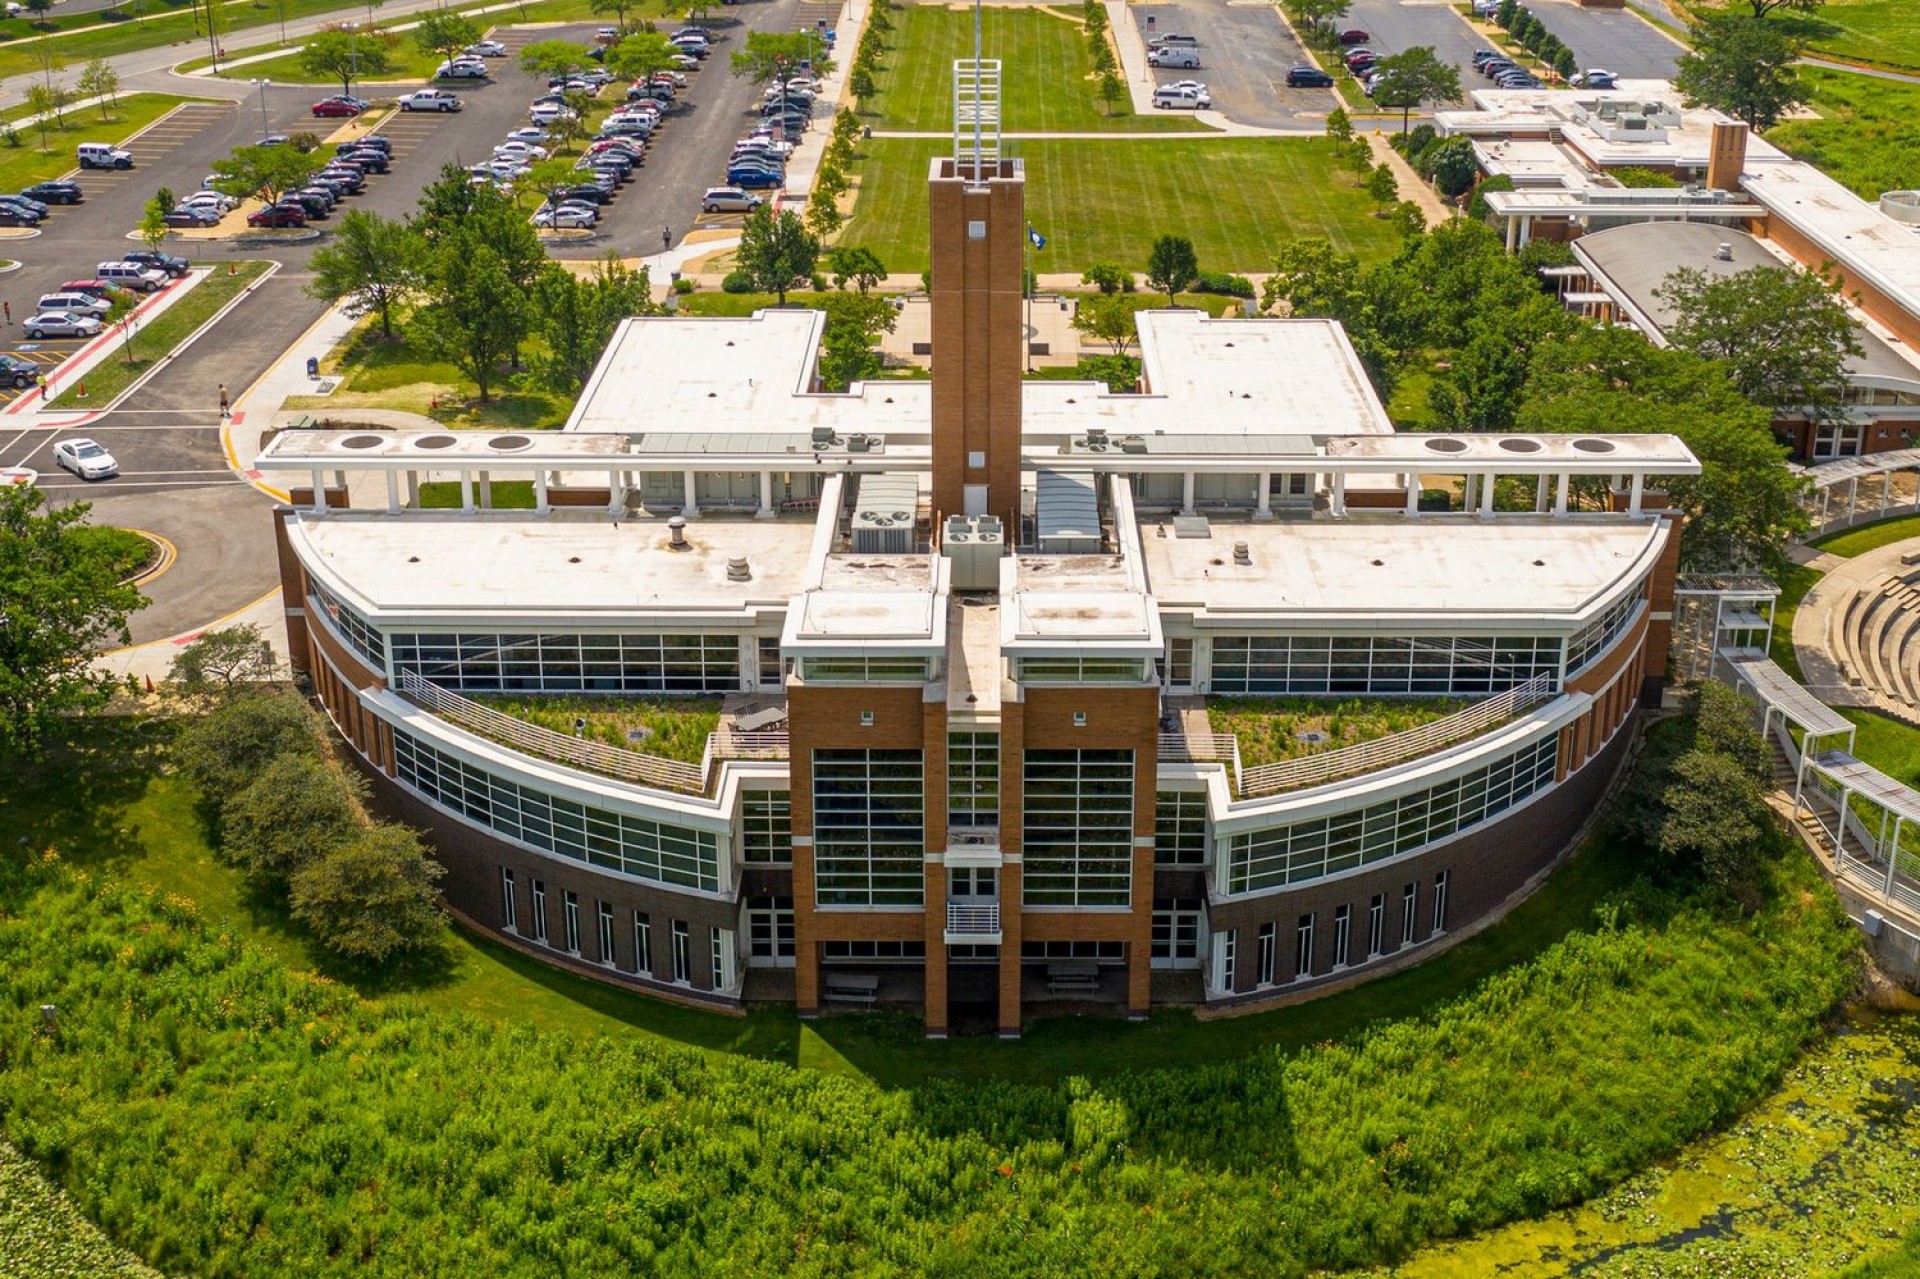 Village of Orland Park Green Roof: One Year After the Build | Getting to watch a green roof grow is a privilege and an eye-opening experience.